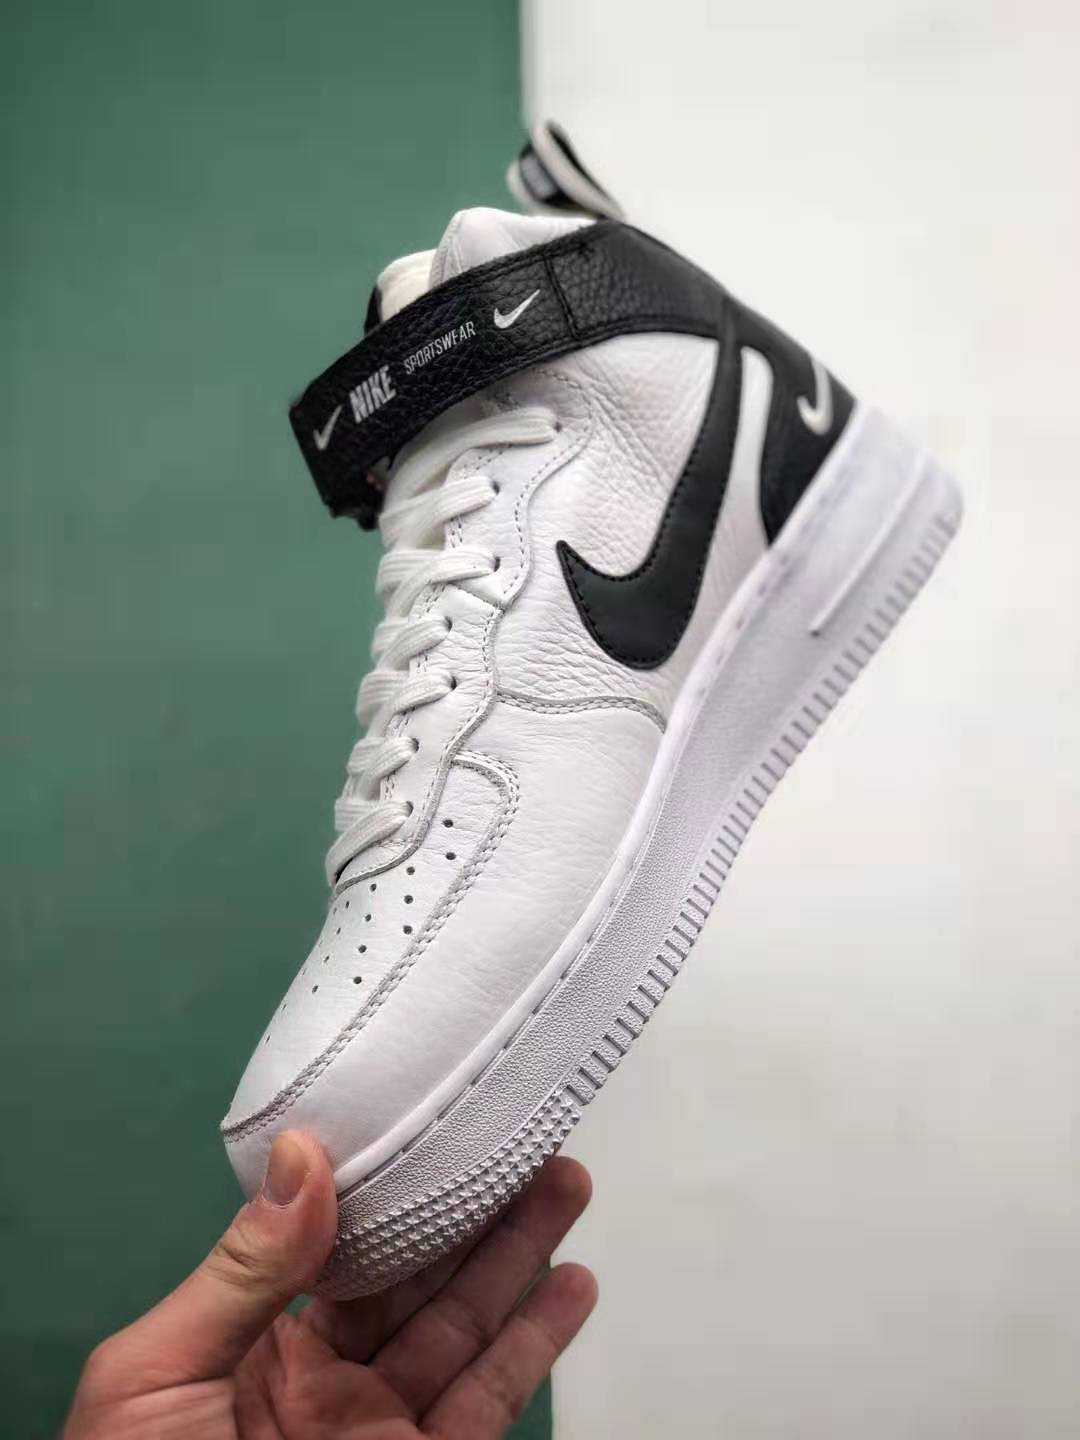 Nike Air Force 1 Mid '07 LV8 White Black 804609-103 - Authentic Sneakers for Men